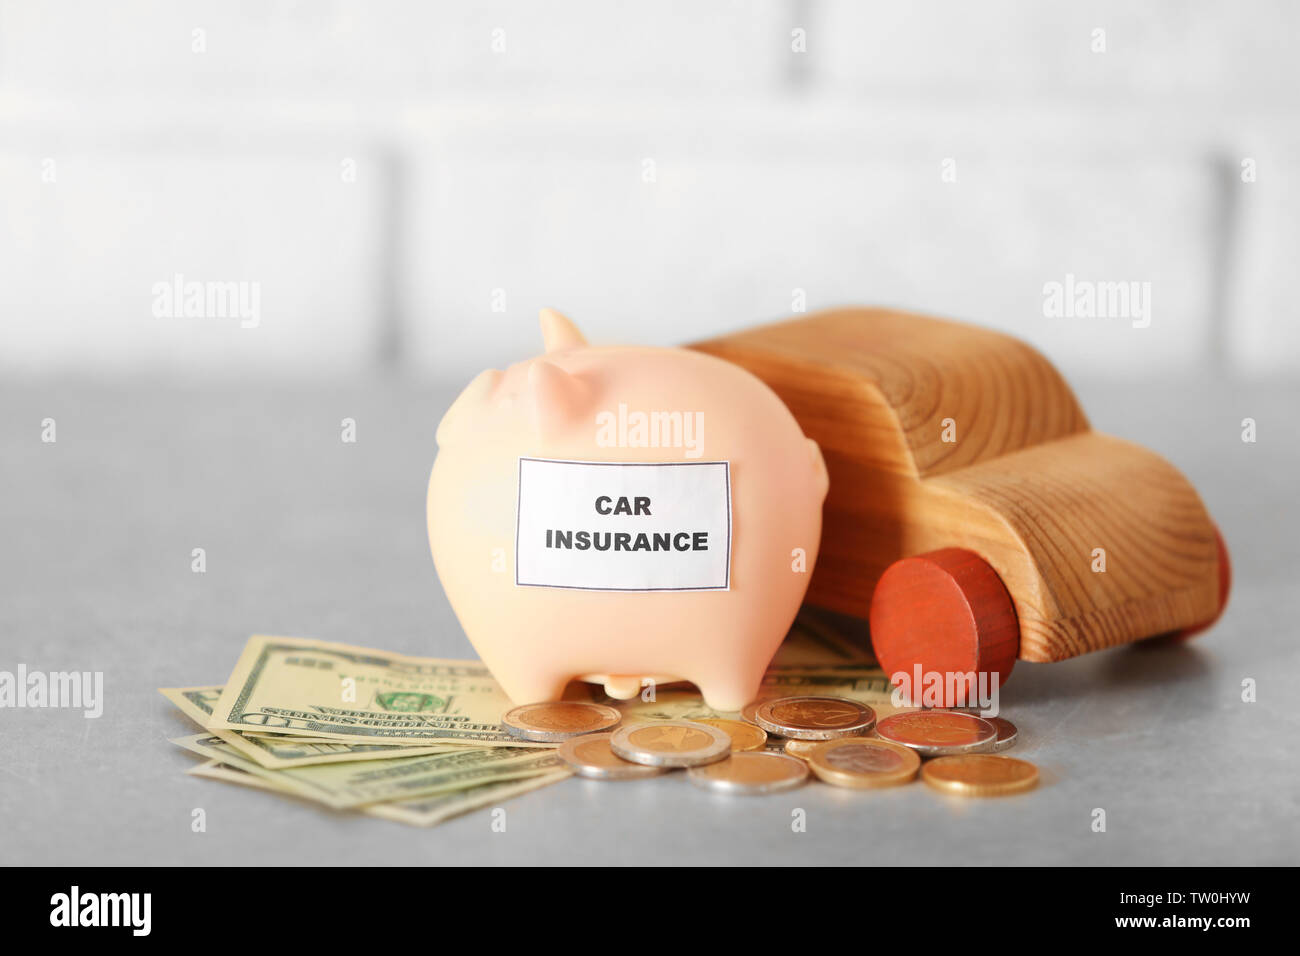 Piggy bank with wooden toy car on light background Stock Photo